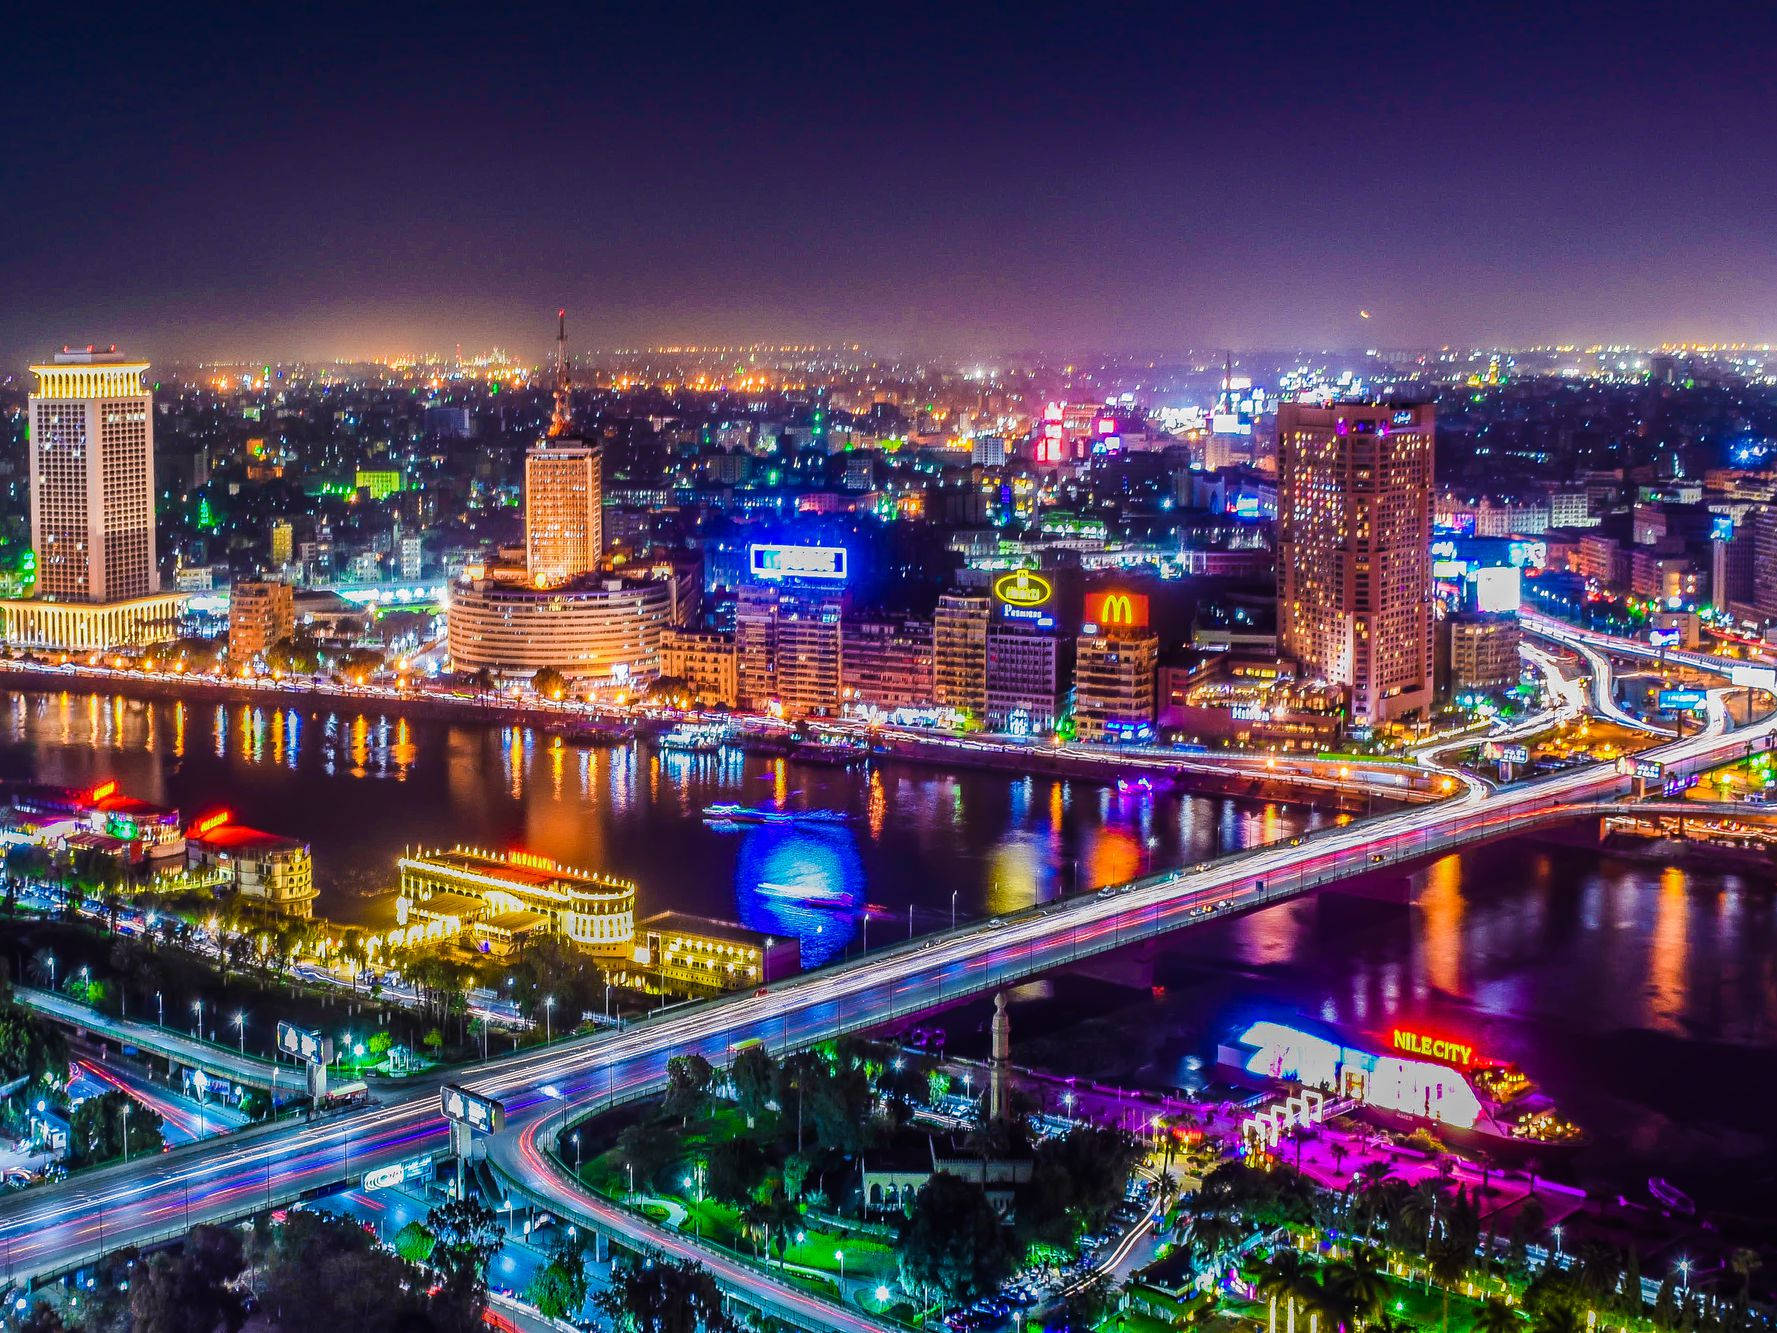 "Vibrant Nightlife in the Scenic City of Cairo" Wallpaper